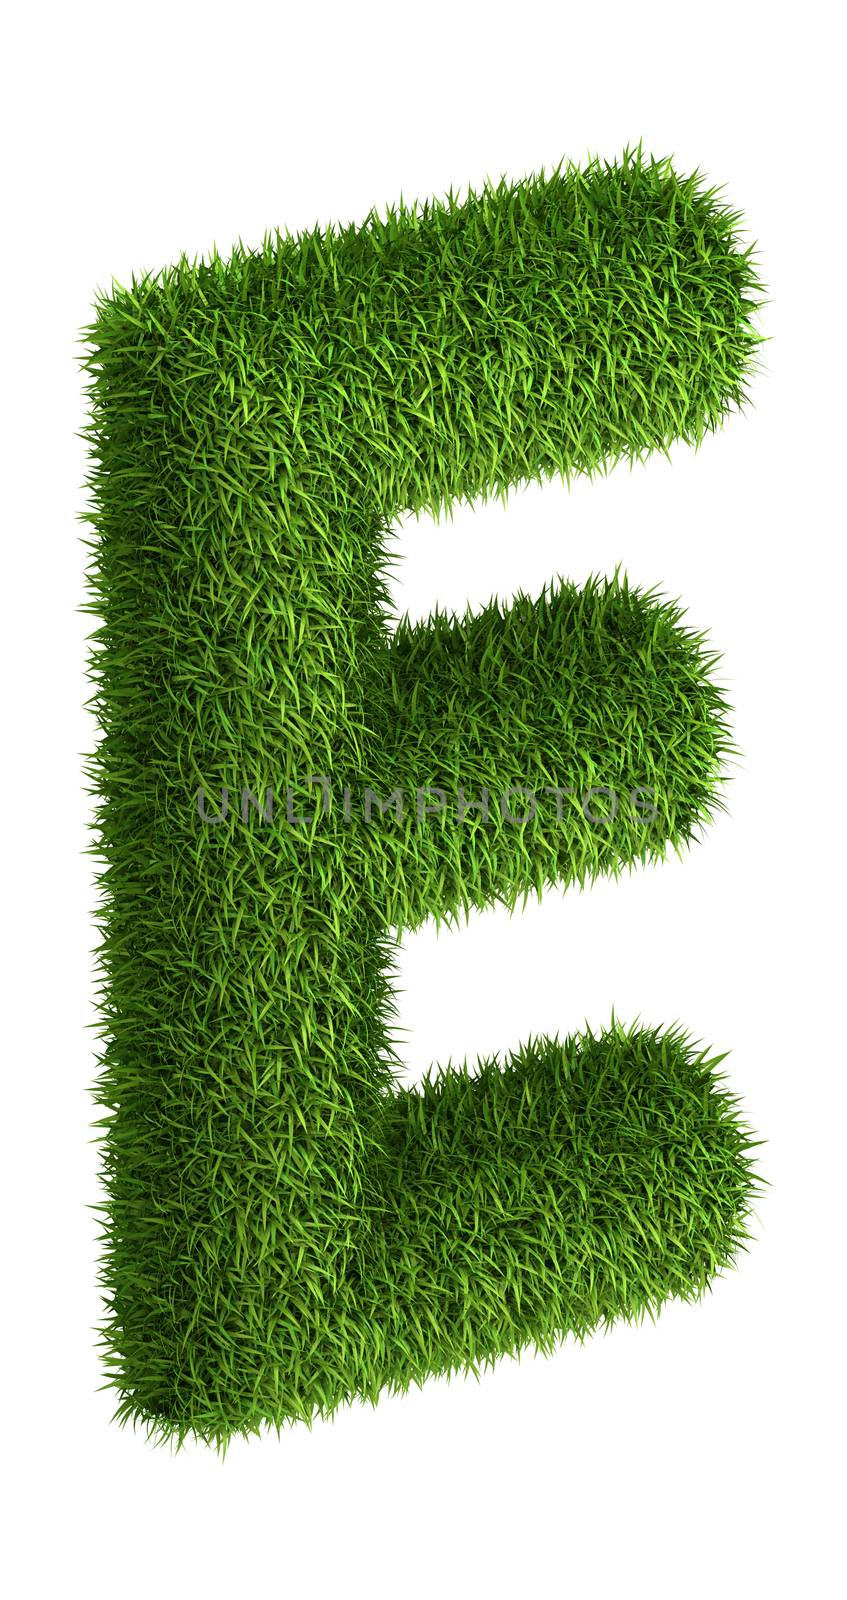 Natural grass letter E by iunewind